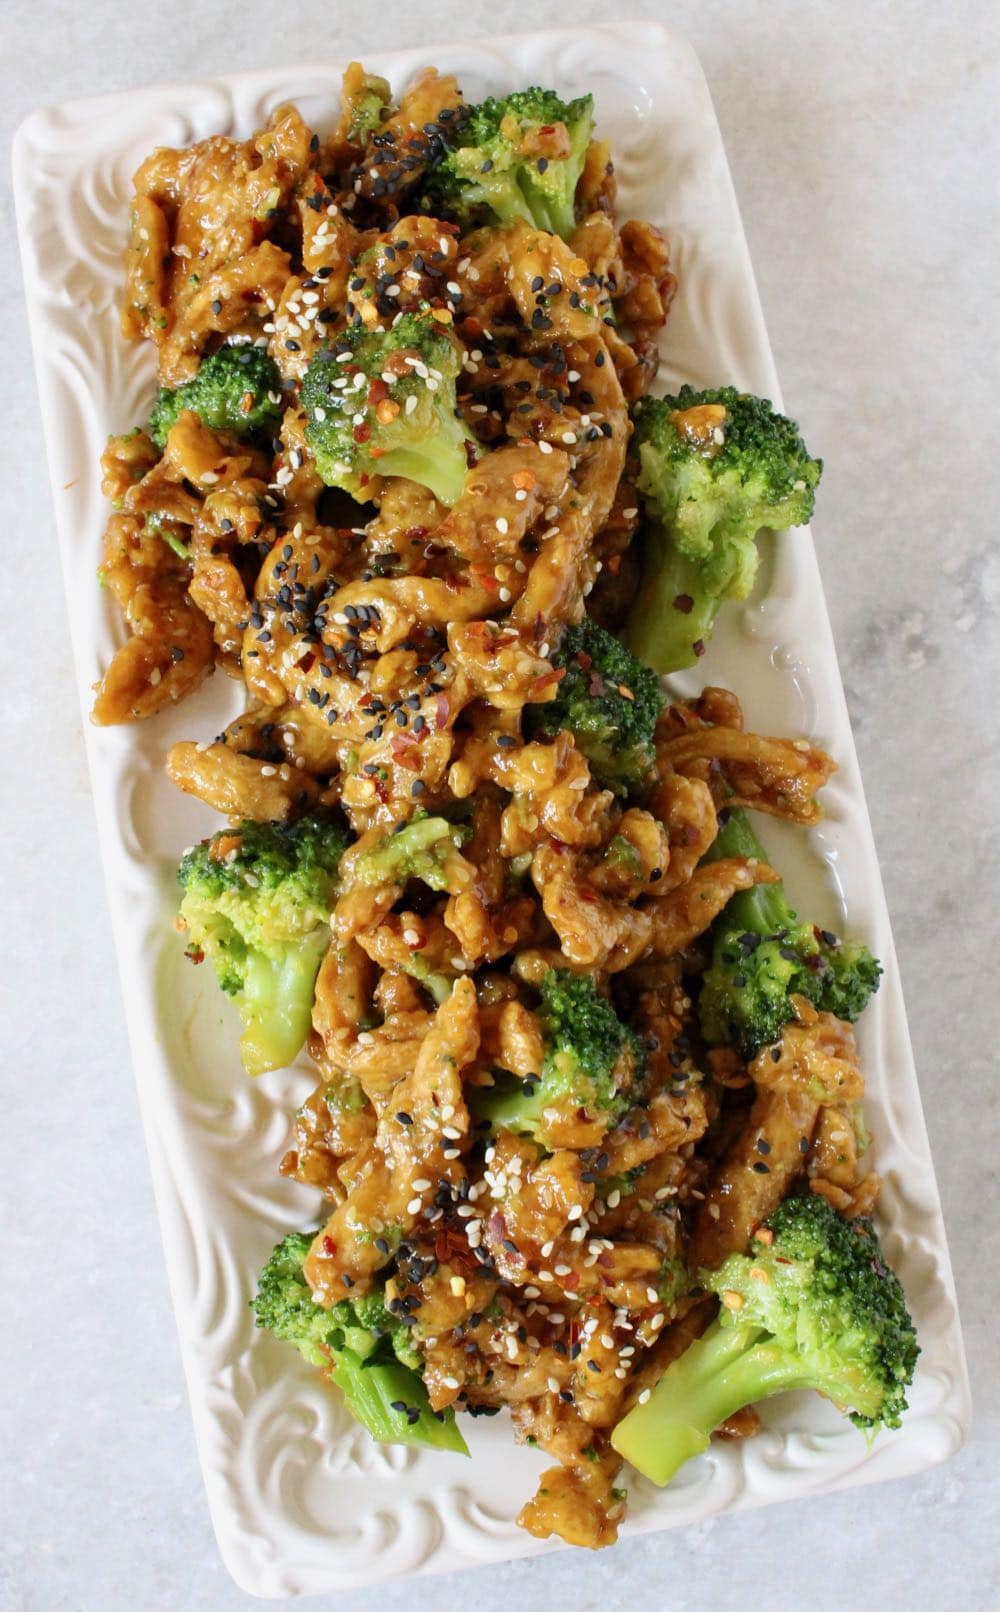 Vegan chicken with broccoli in a homemade garlic ginger sauce on white serving platter.